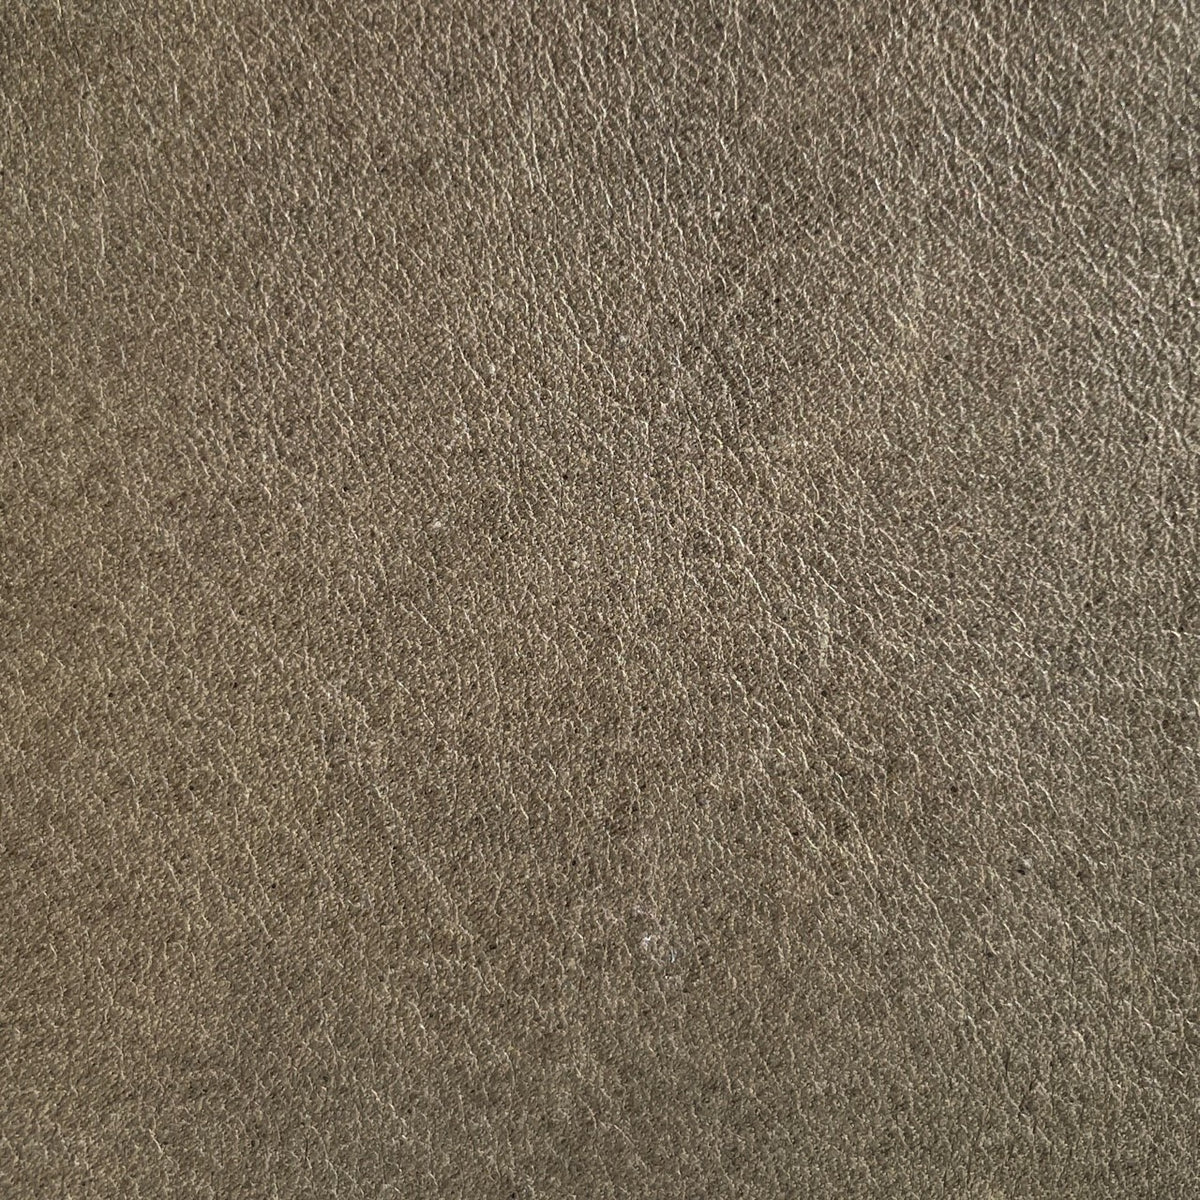 Tuscany Cow Half Sides | Olive | 1.8  -2.0mm | 10 - 12 sq.ft | From $225 ea.